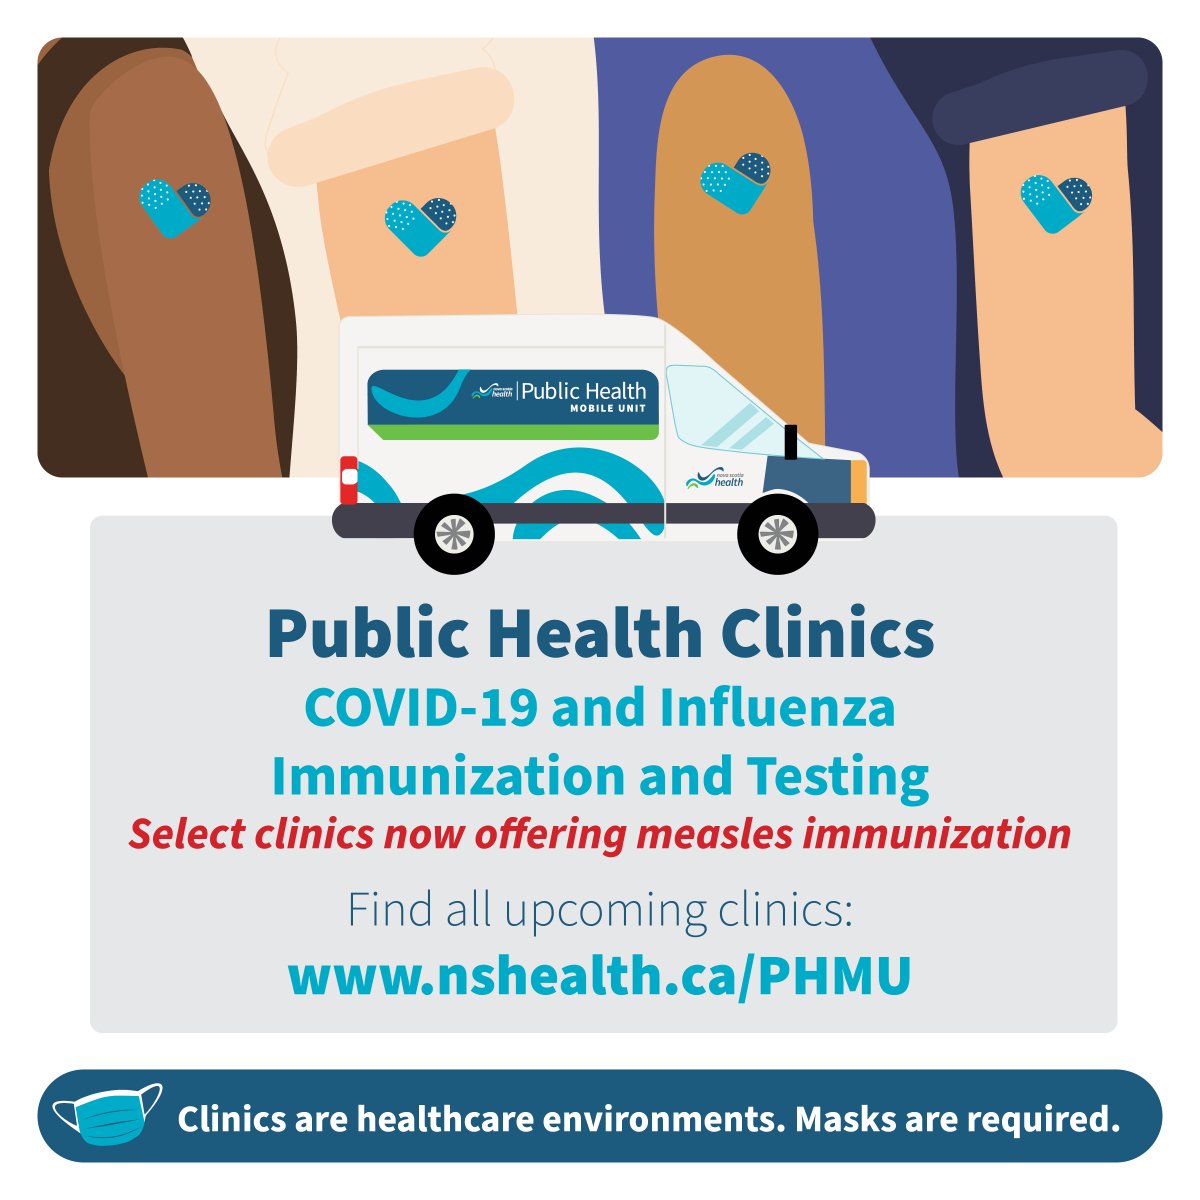 Public Health supports access to COVID-19 and influenza immunization and testing across the province. Select clinics are also offering measles immunization. All upcoming clinics can be found online at nshealth.ca/PHMU.